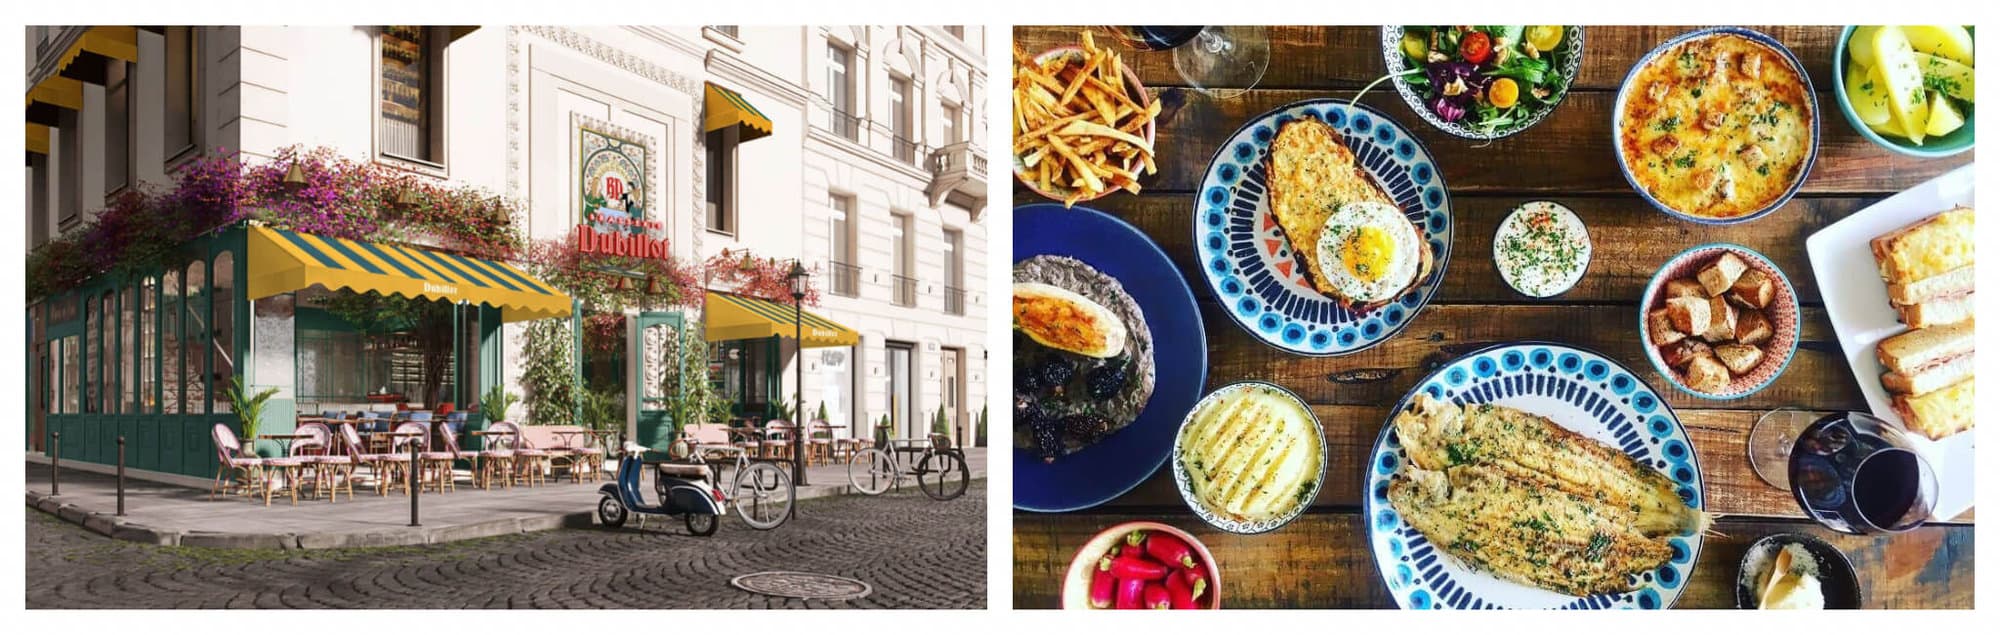 Left: A Parisian restaurant with green walls, green and yellow striped tents, and pink flowers. Right: A wooden dining table filled with brown fried dishes in blue and white circular plates.